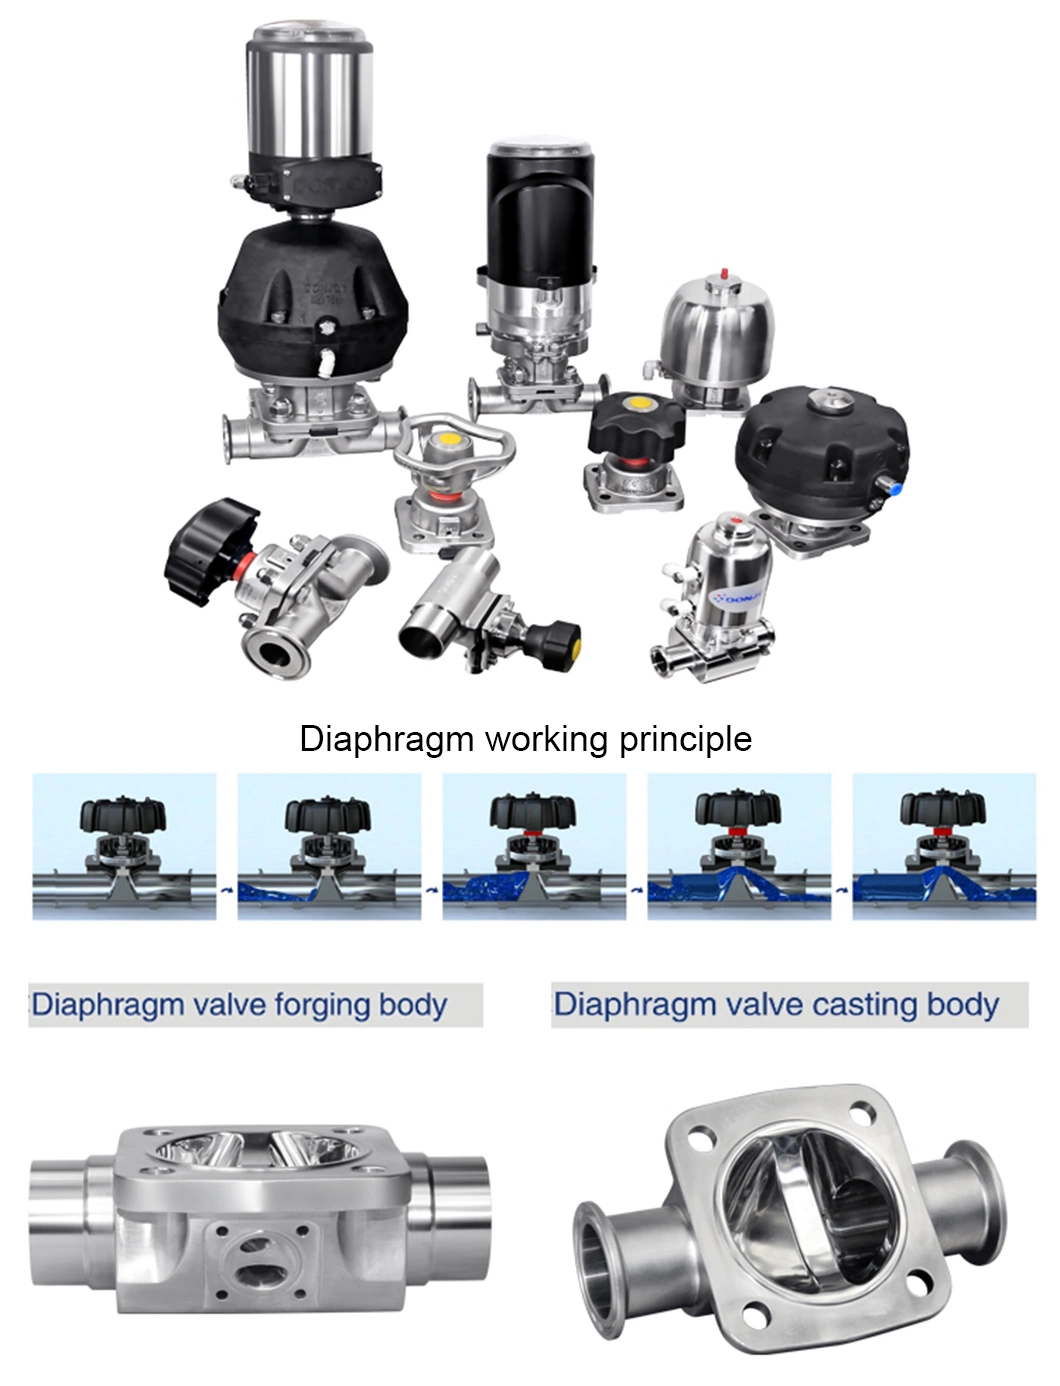 Pharmaceutical Process Control Pneumatically Actuated Diaphragm Valve with Positioner